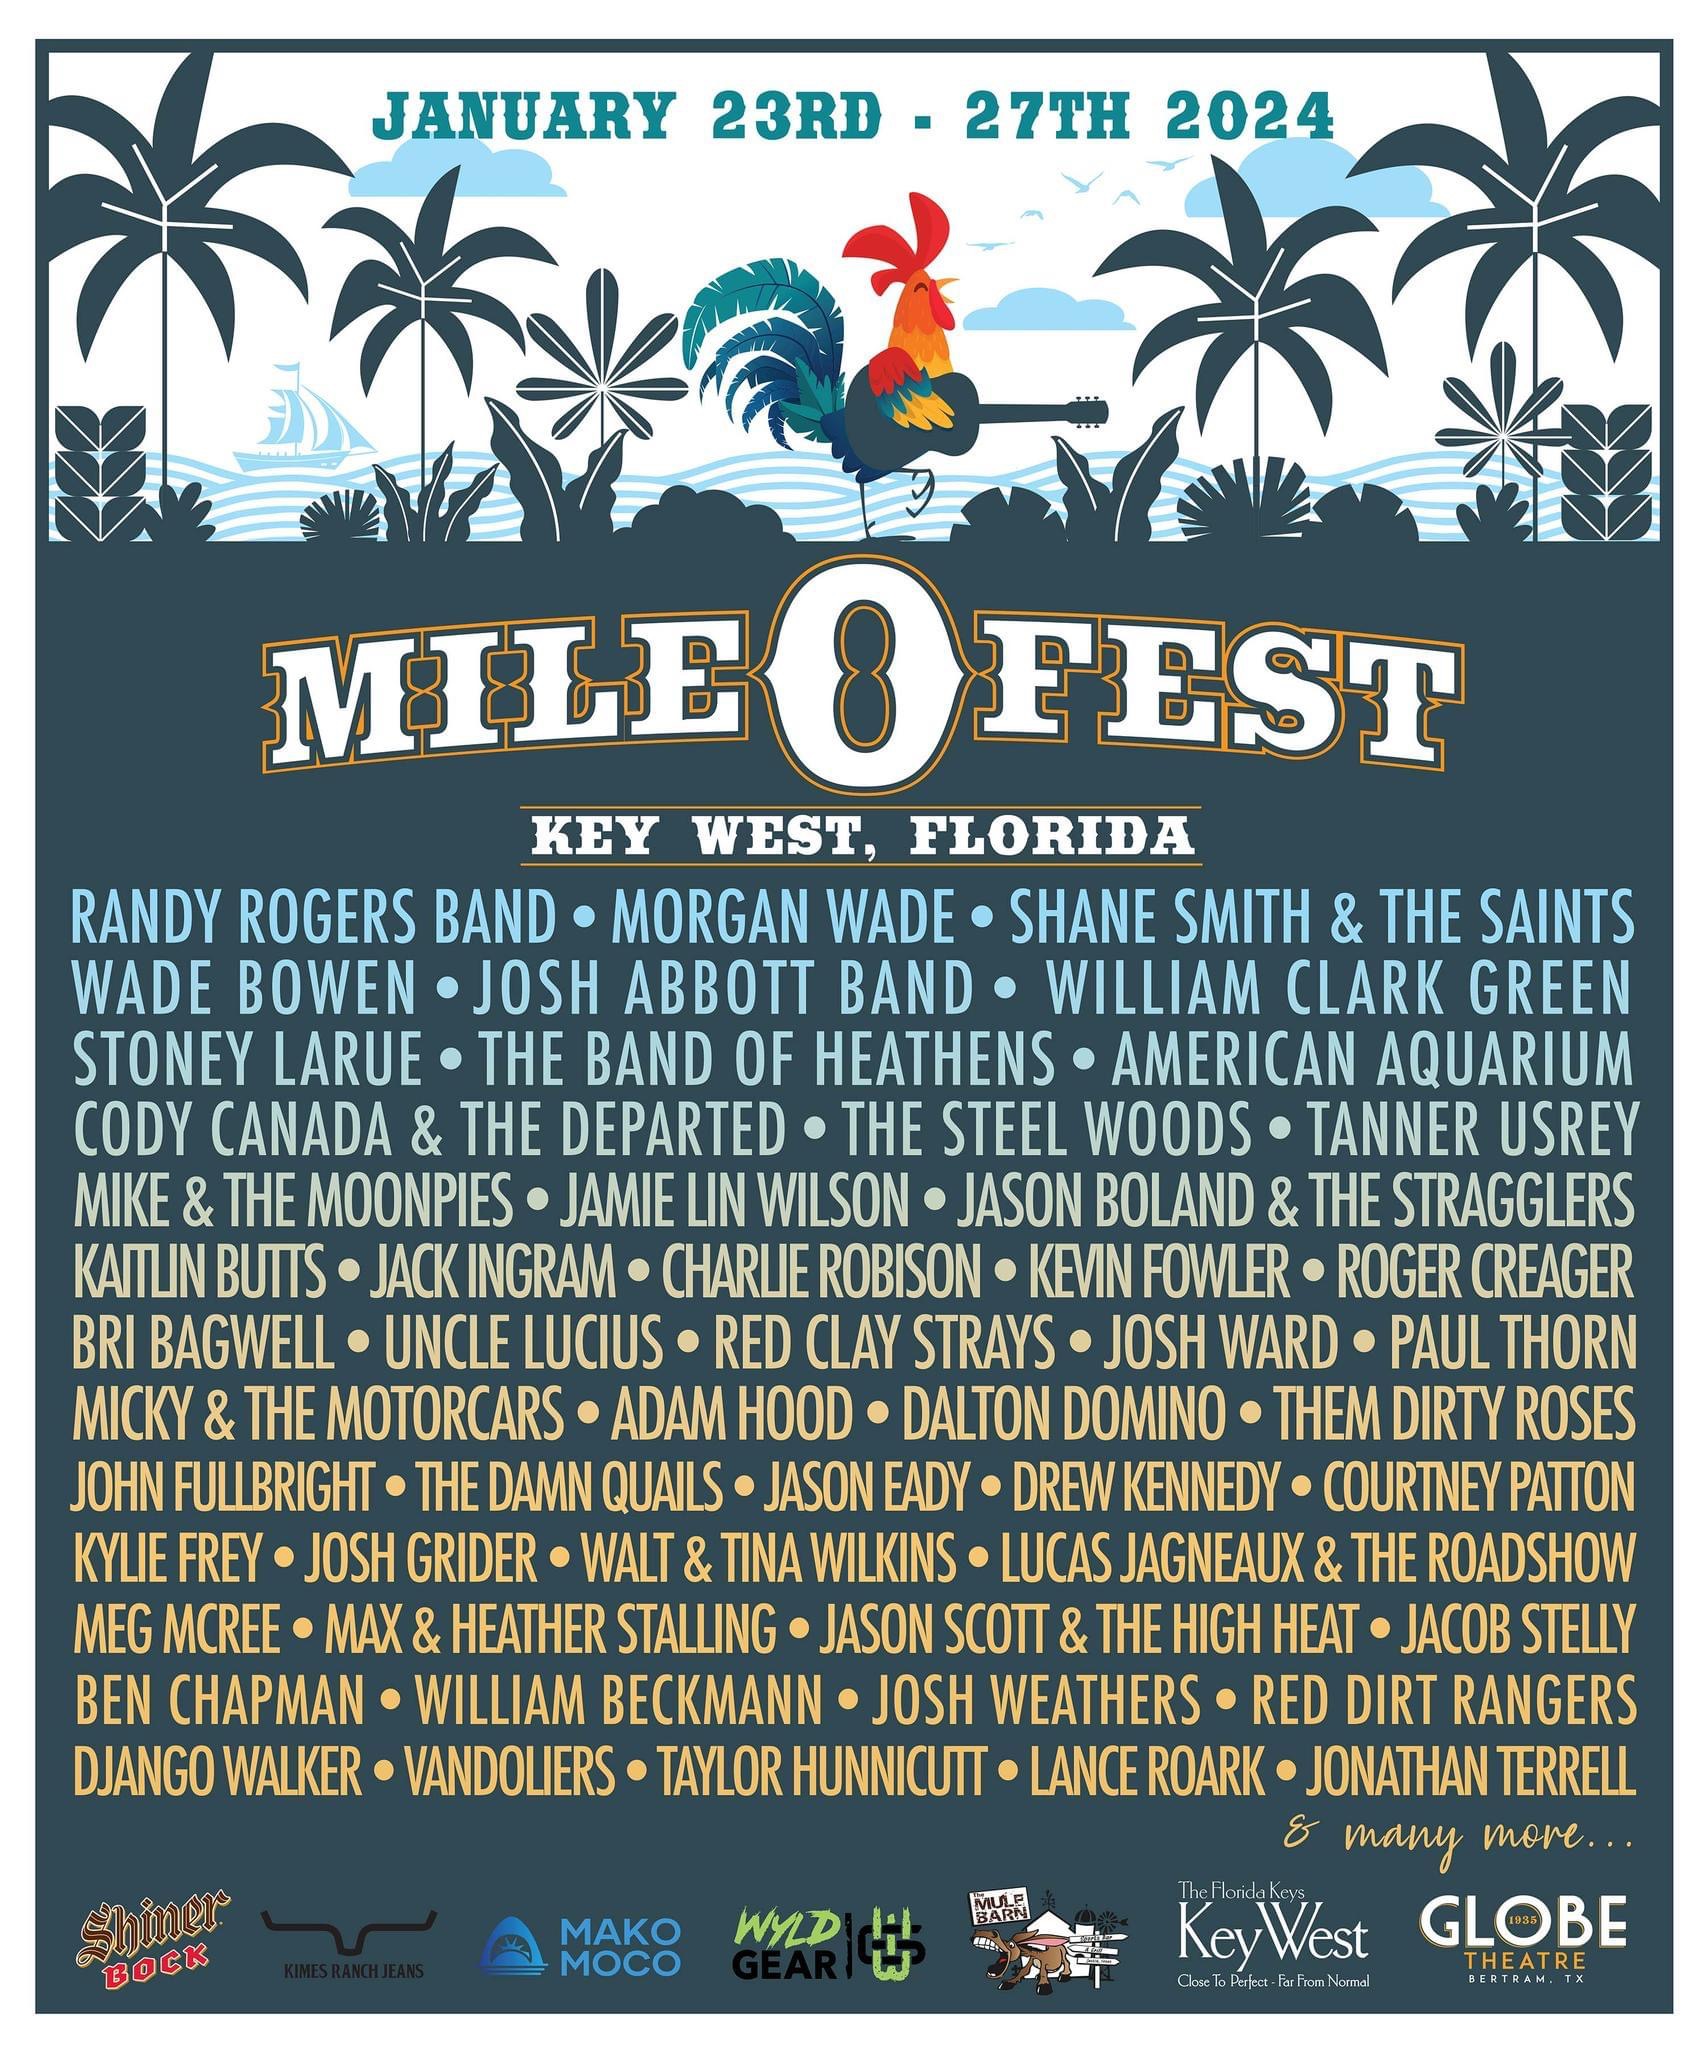 OH WOOK! PRODUCTIONS RELEASES LINEUP FOR 7th ANNUAL MILE 0 FEST KEY WEST, JANUARY 23-27, 2024